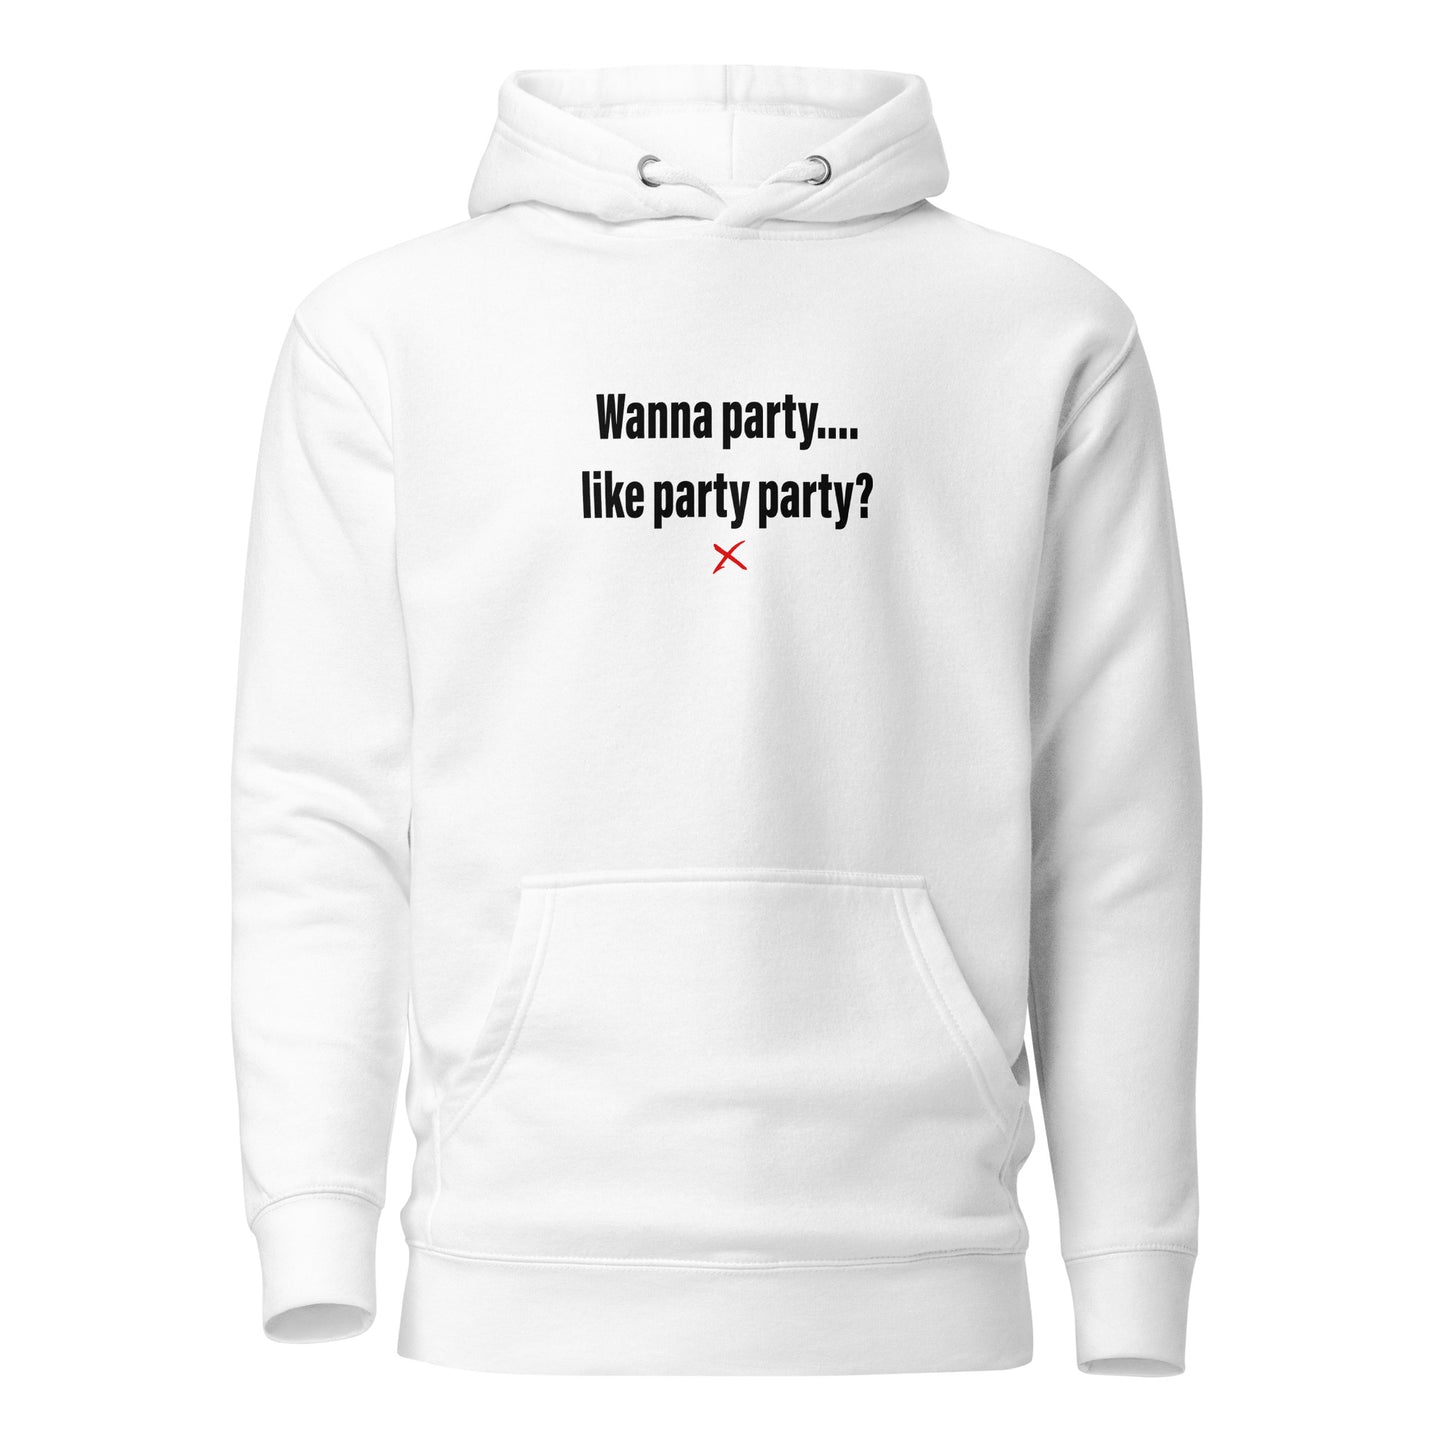 Wanna party.... like party party? - Hoodie